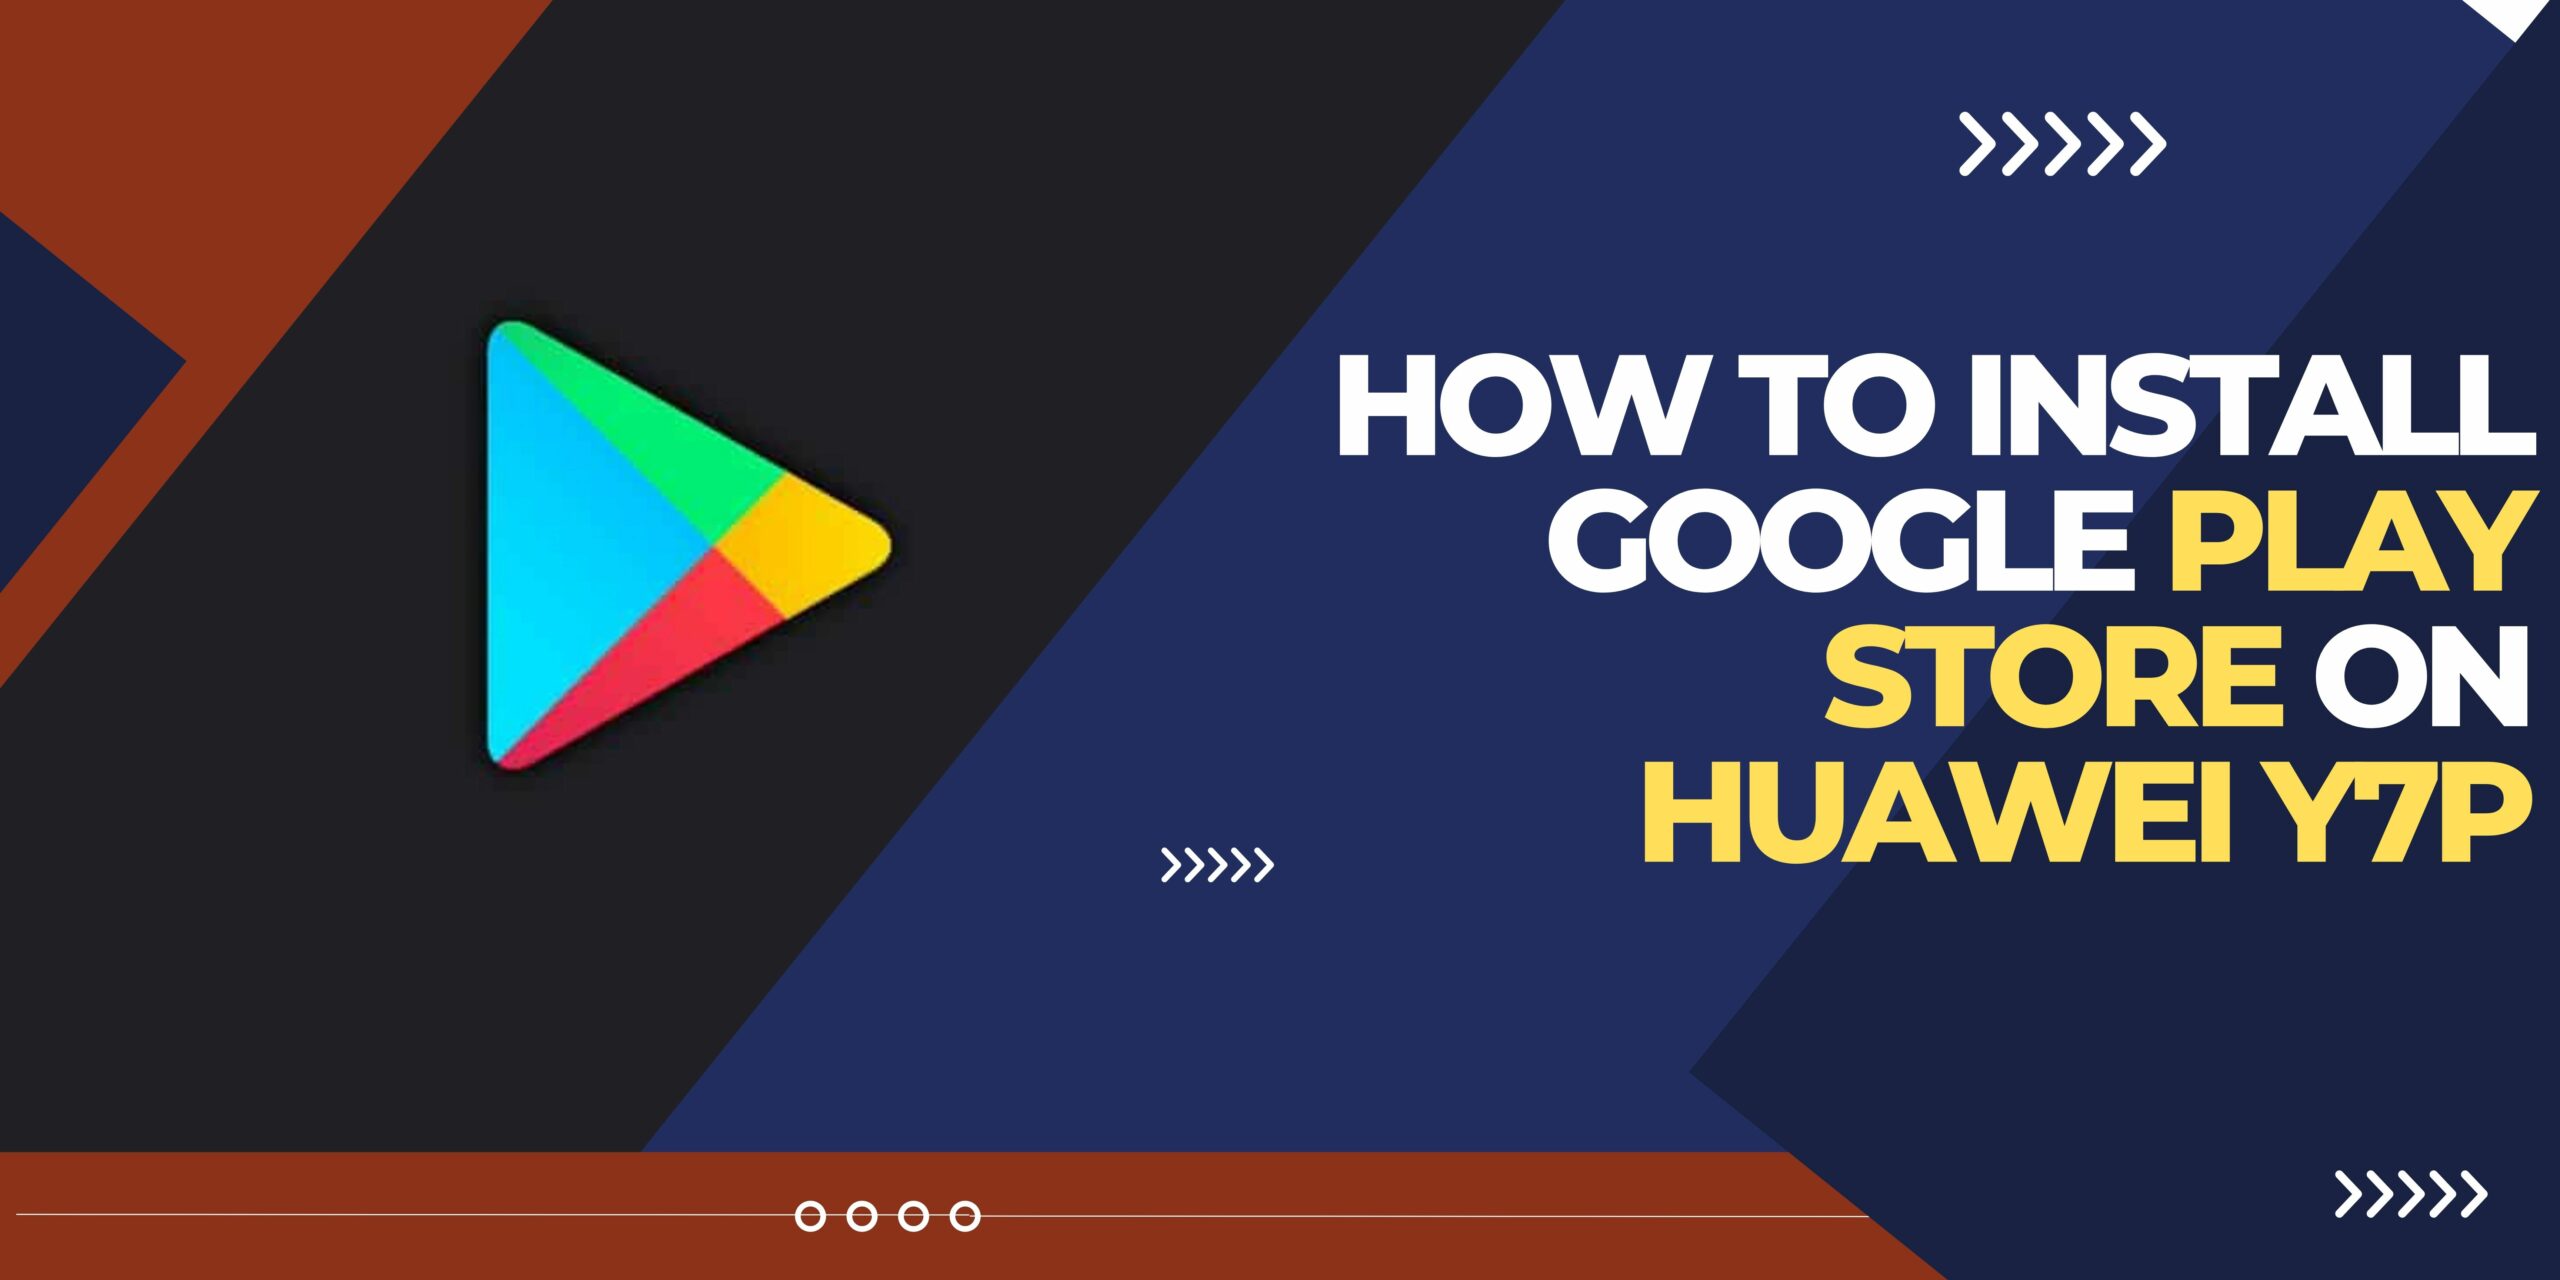 an image of How to Install Google Play Store on Huawei y7p